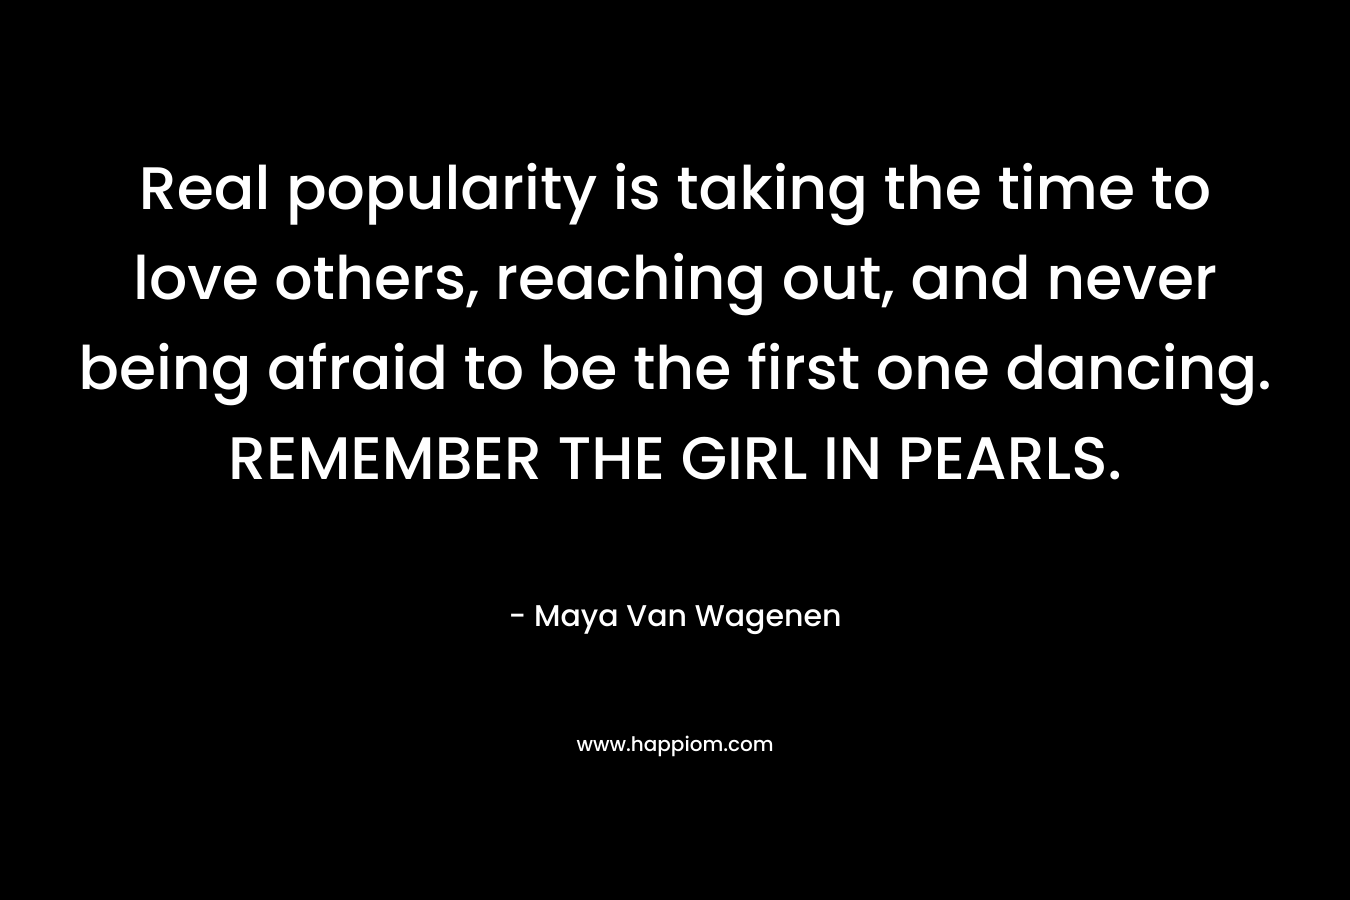 Real popularity is taking the time to love others, reaching out, and never being afraid to be the first one dancing. REMEMBER THE GIRL IN PEARLS.